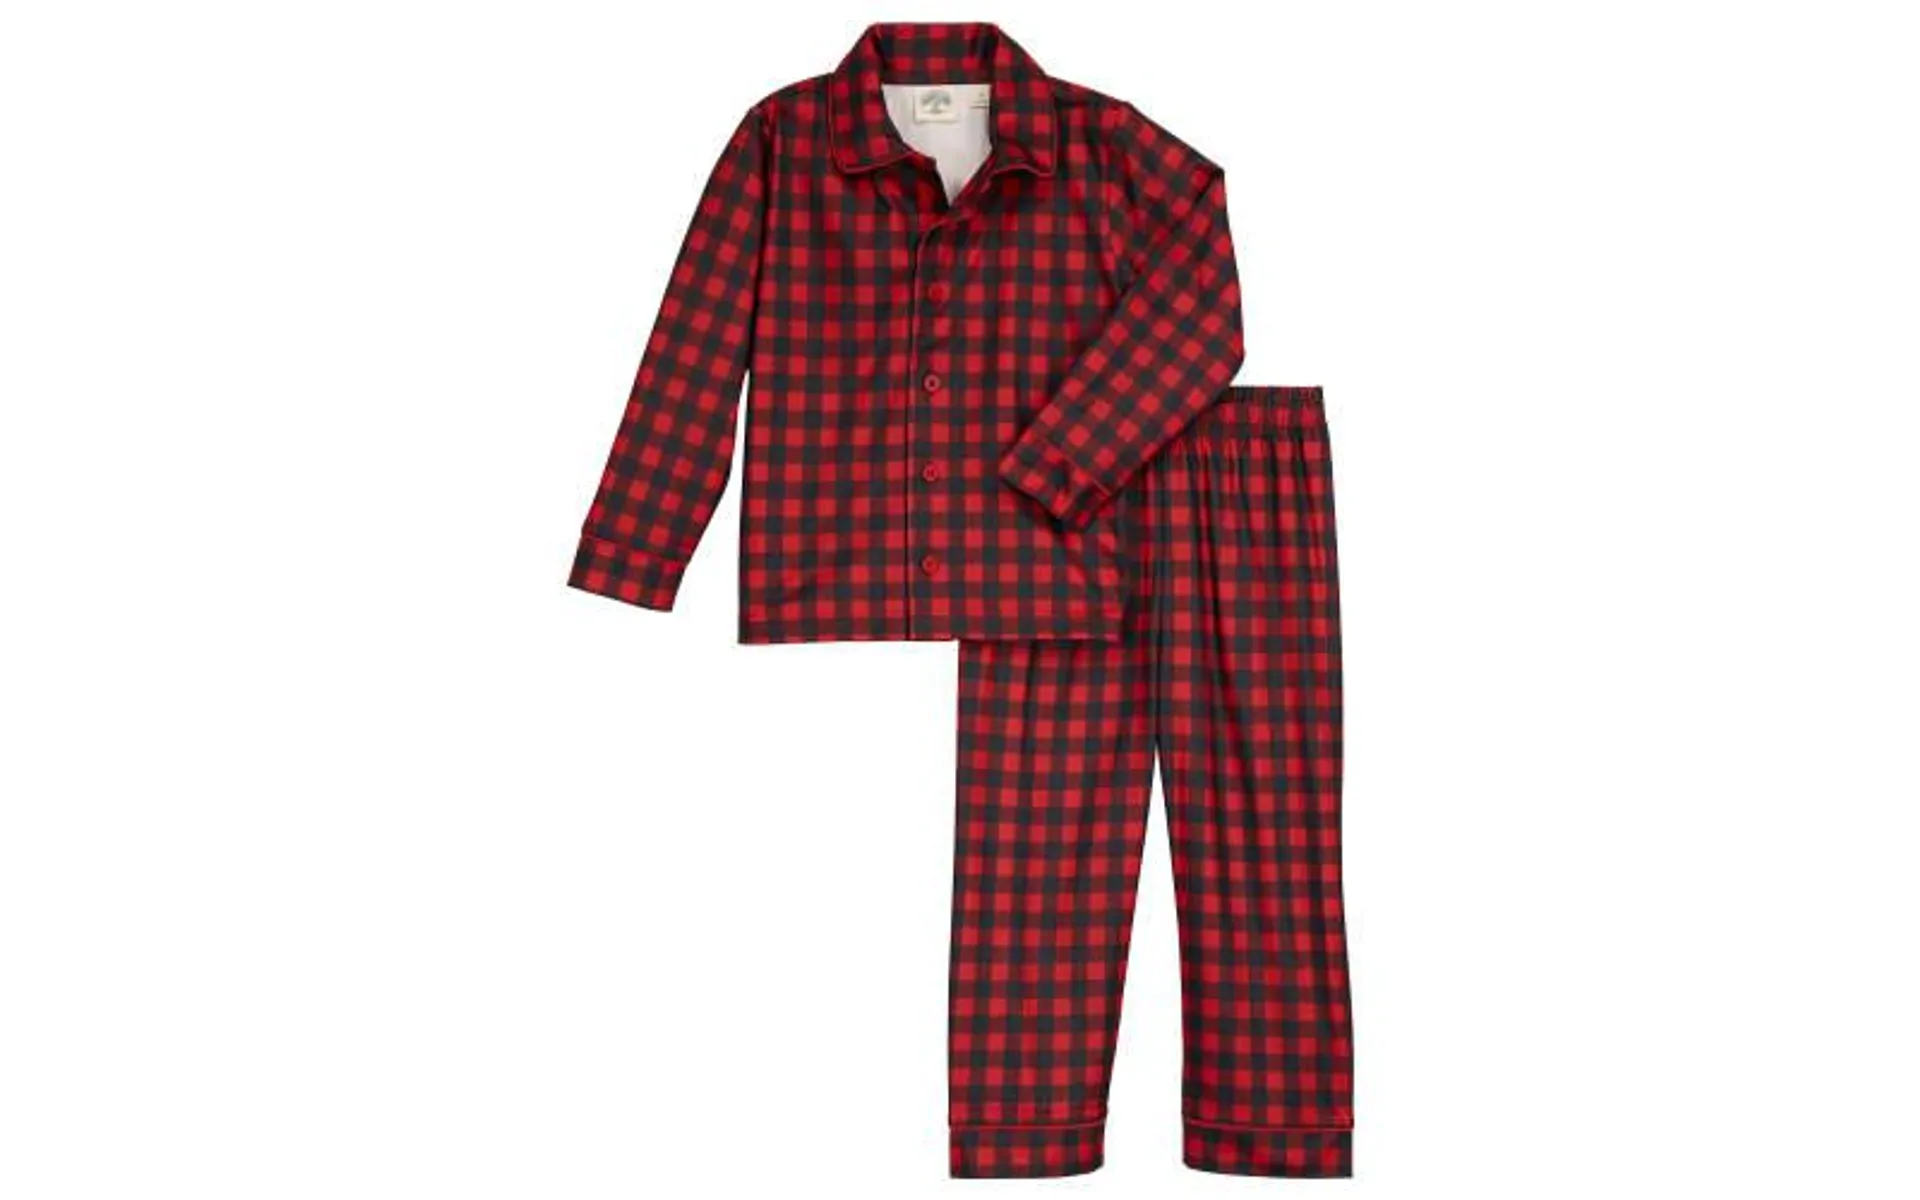 Outdoor Kids Holiday Plaid Long-Sleeve Pajamas Set for Babies, Toddlers, or Kids